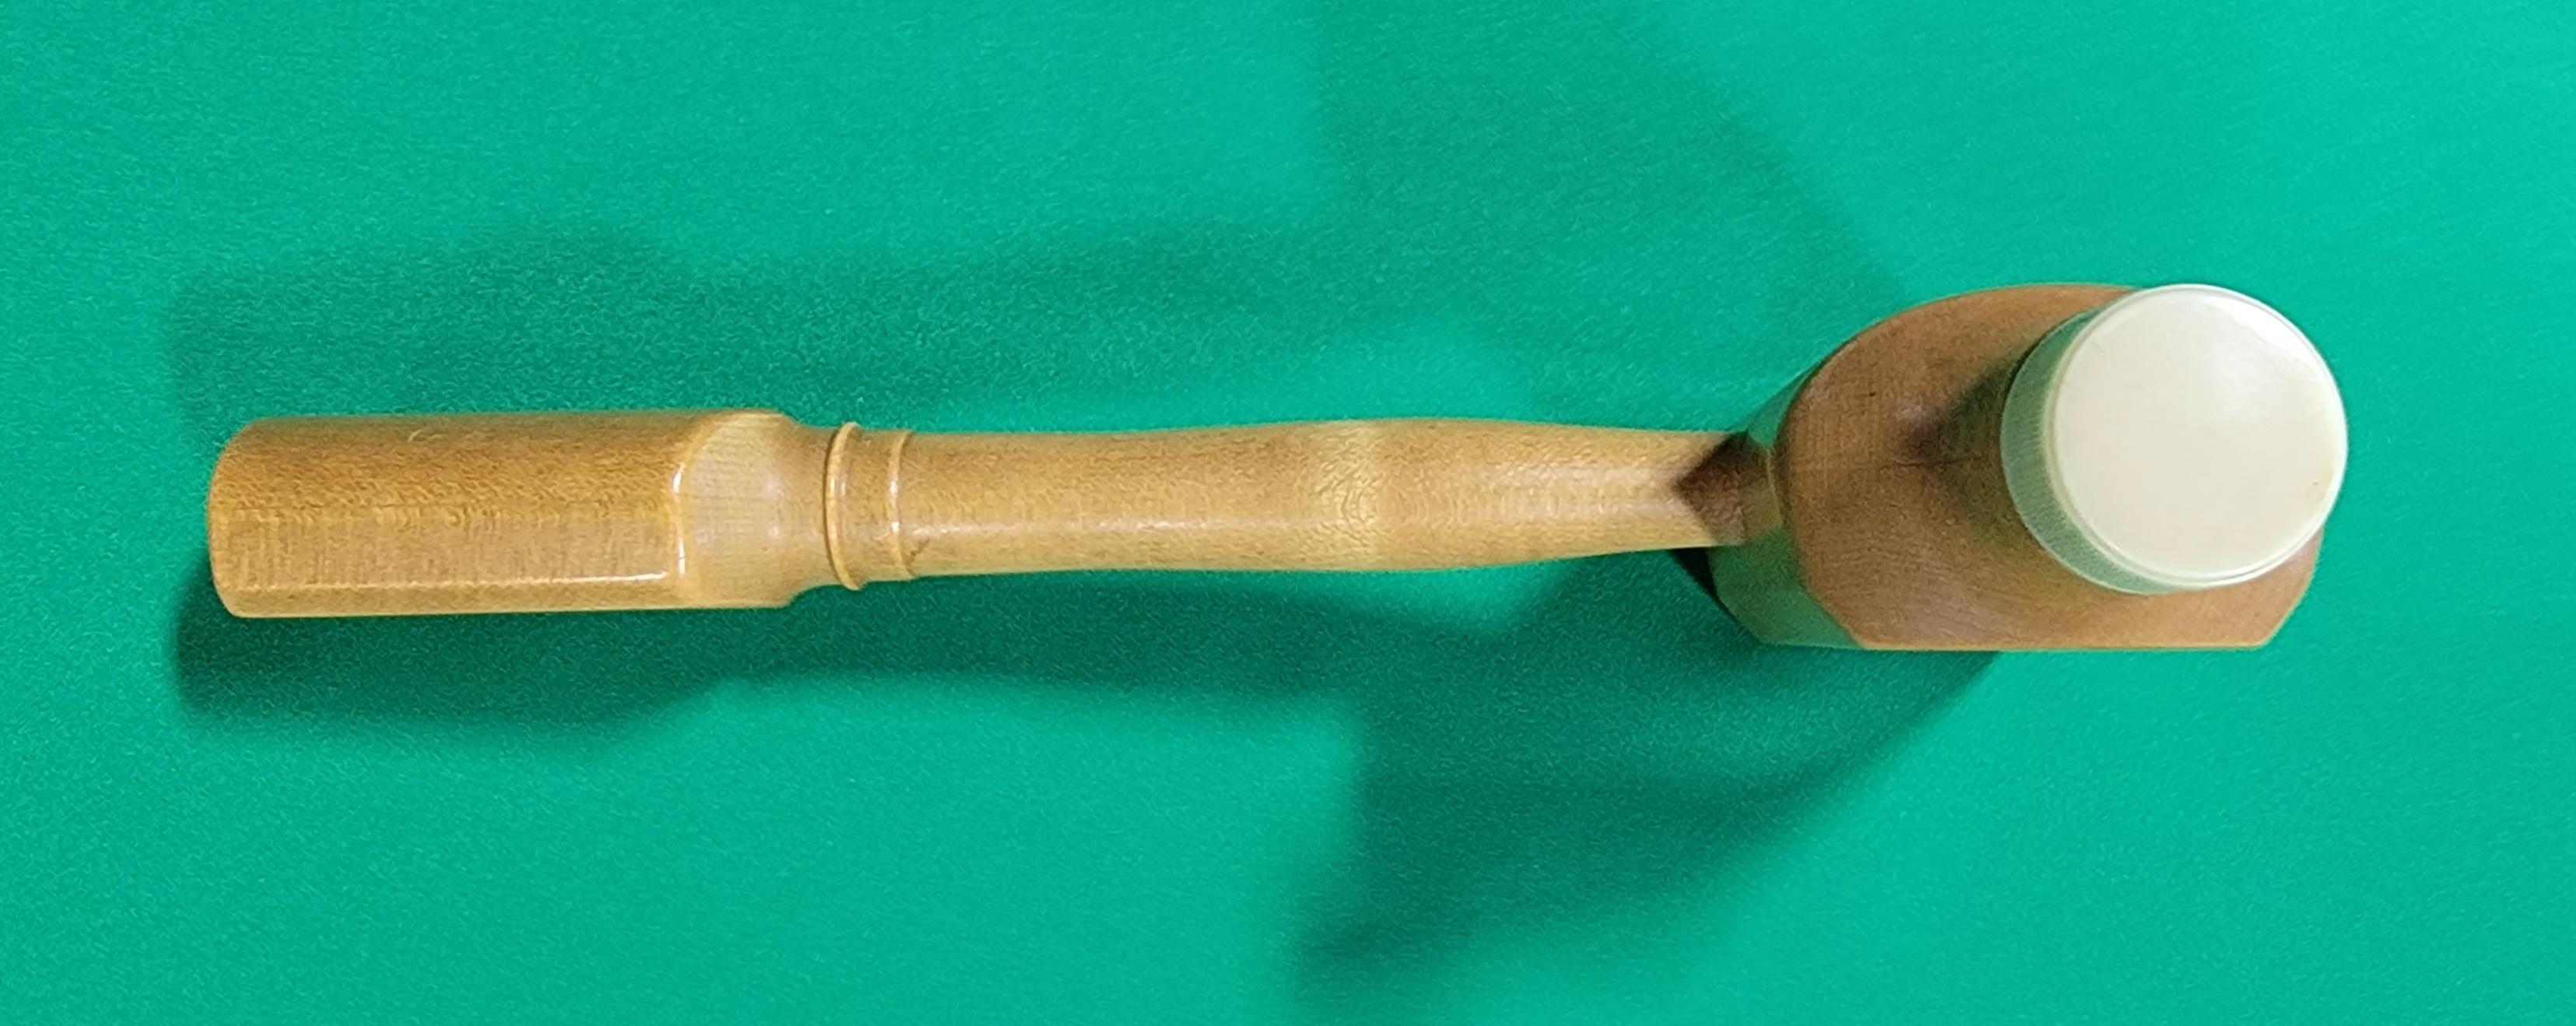 Pharmaceutical Presentation Gavel Dated 1941 1942 In Good Condition For Sale In Fulton, CA